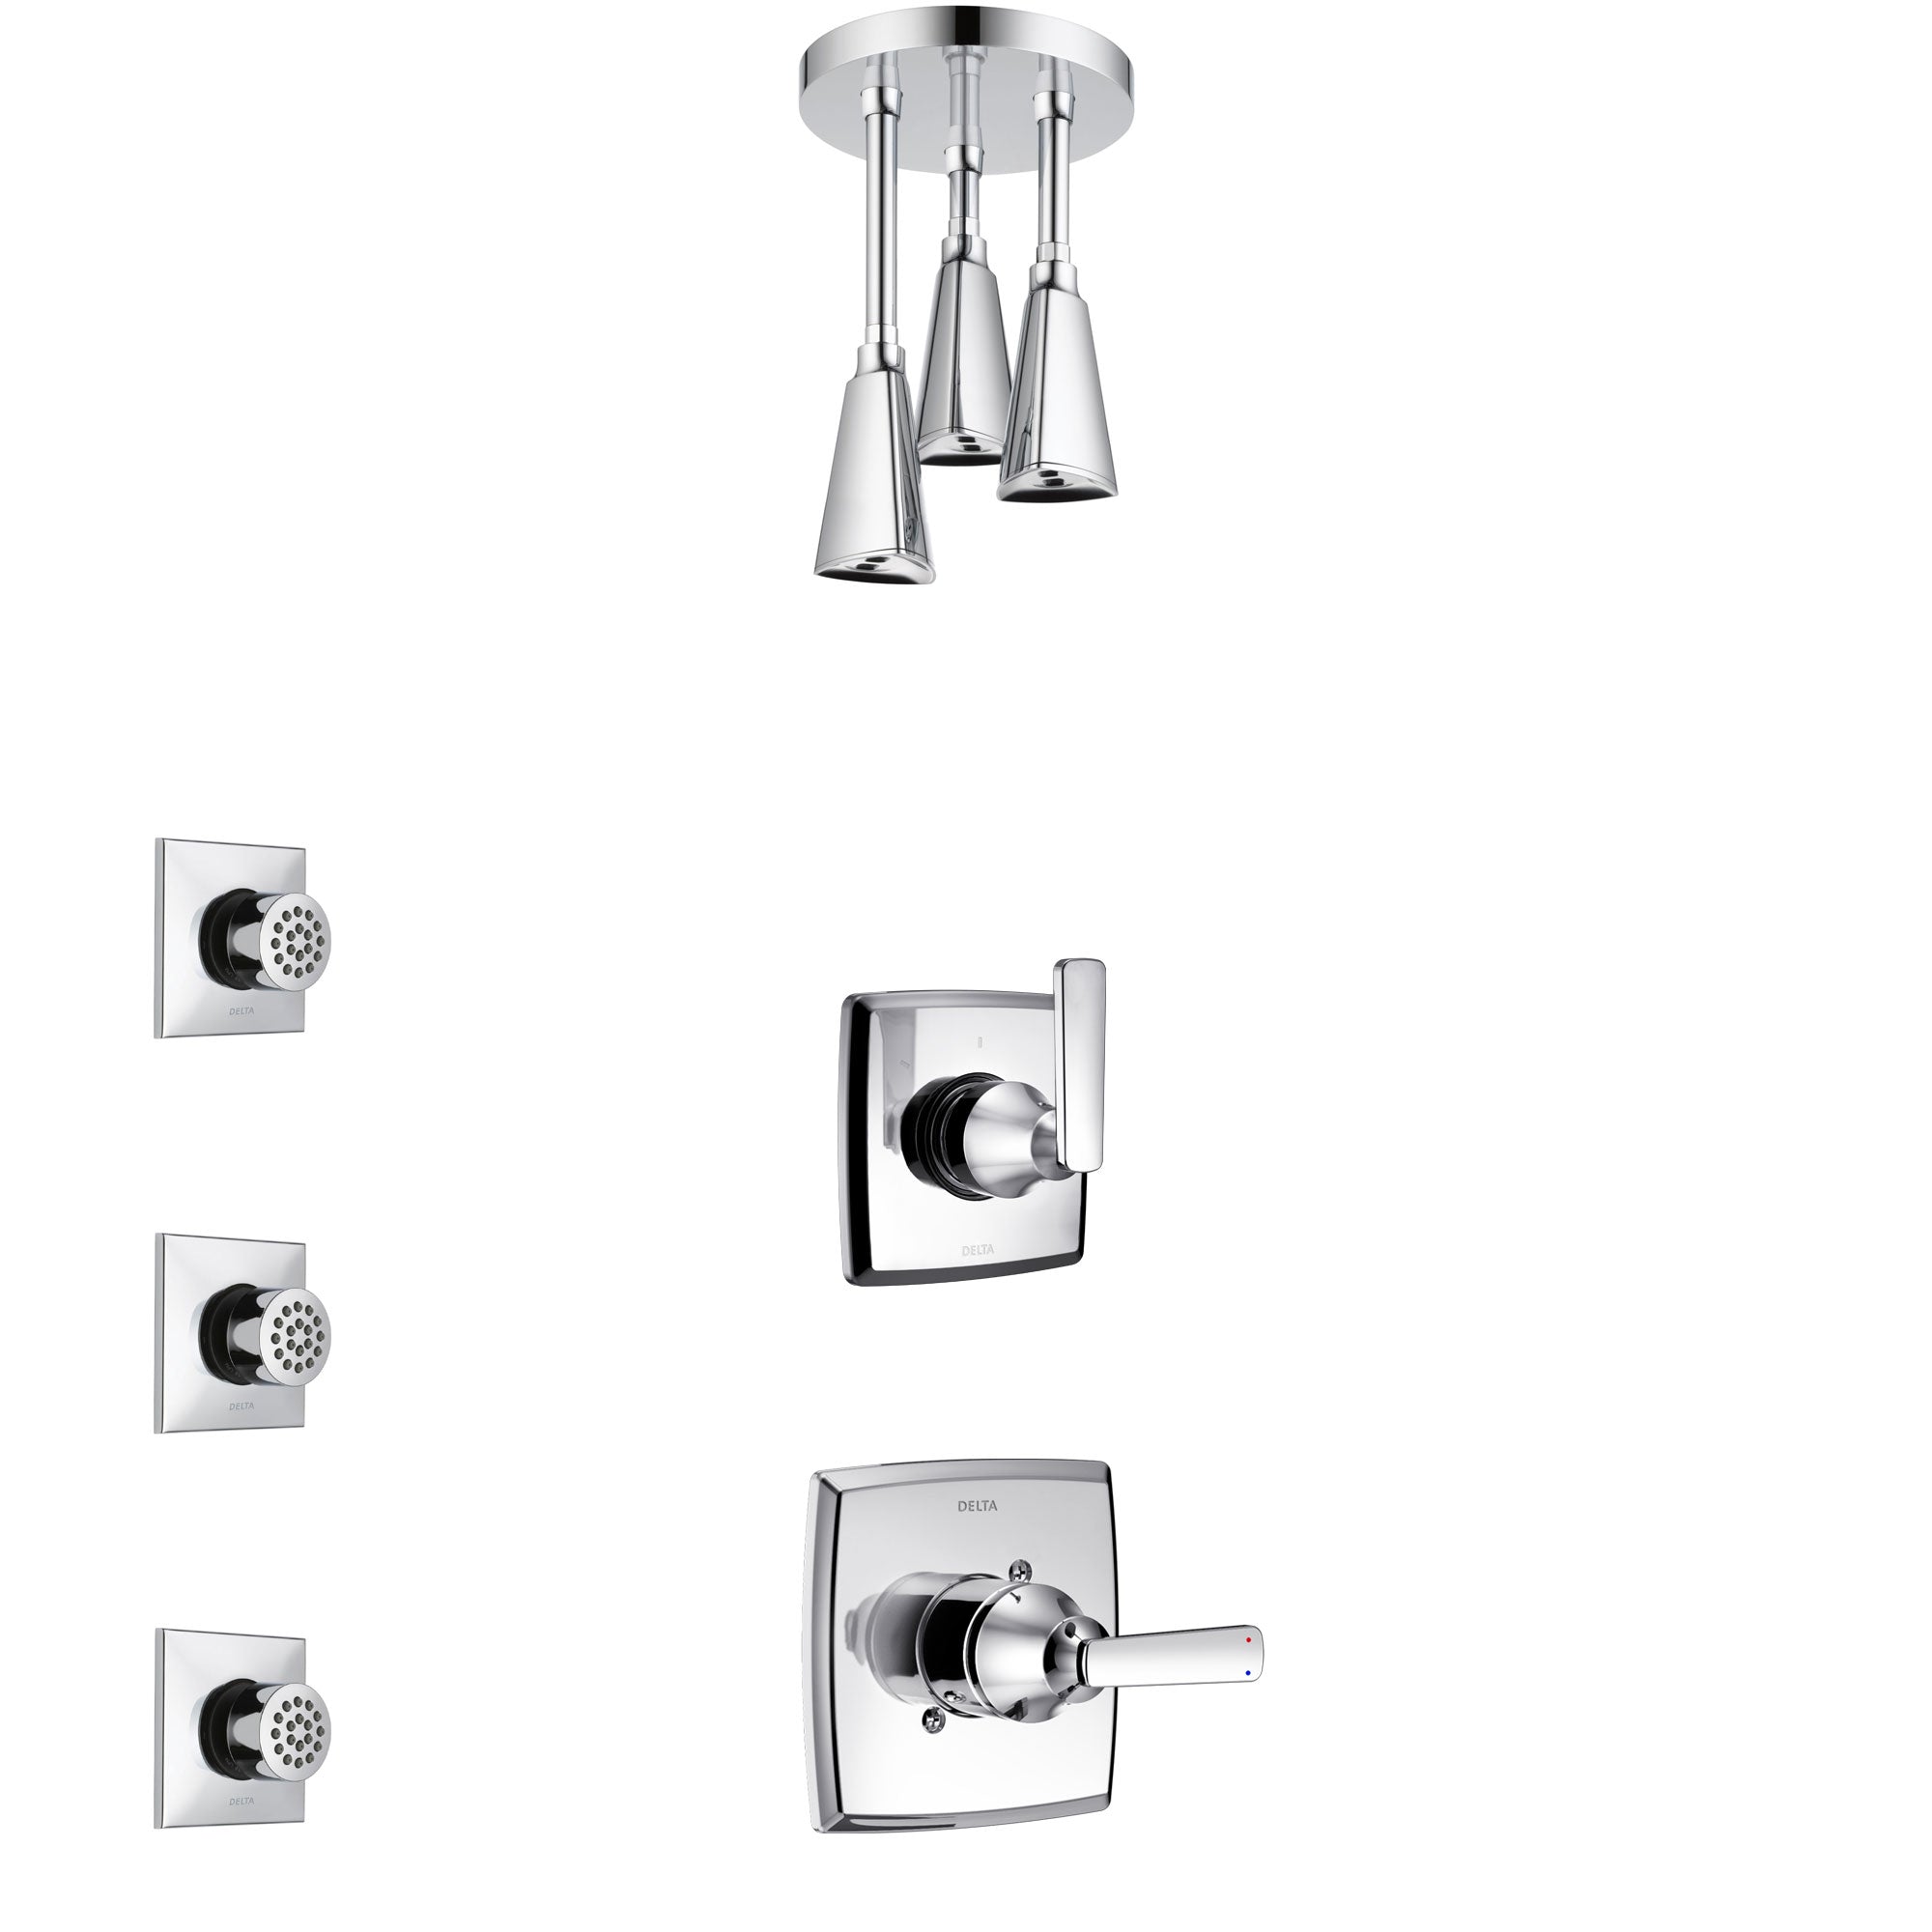 Delta Ashlyn Chrome Finish Shower System with Control Handle, 3-Setting Diverter, Ceiling Mount Showerhead, and 3 Body Sprays SS14644